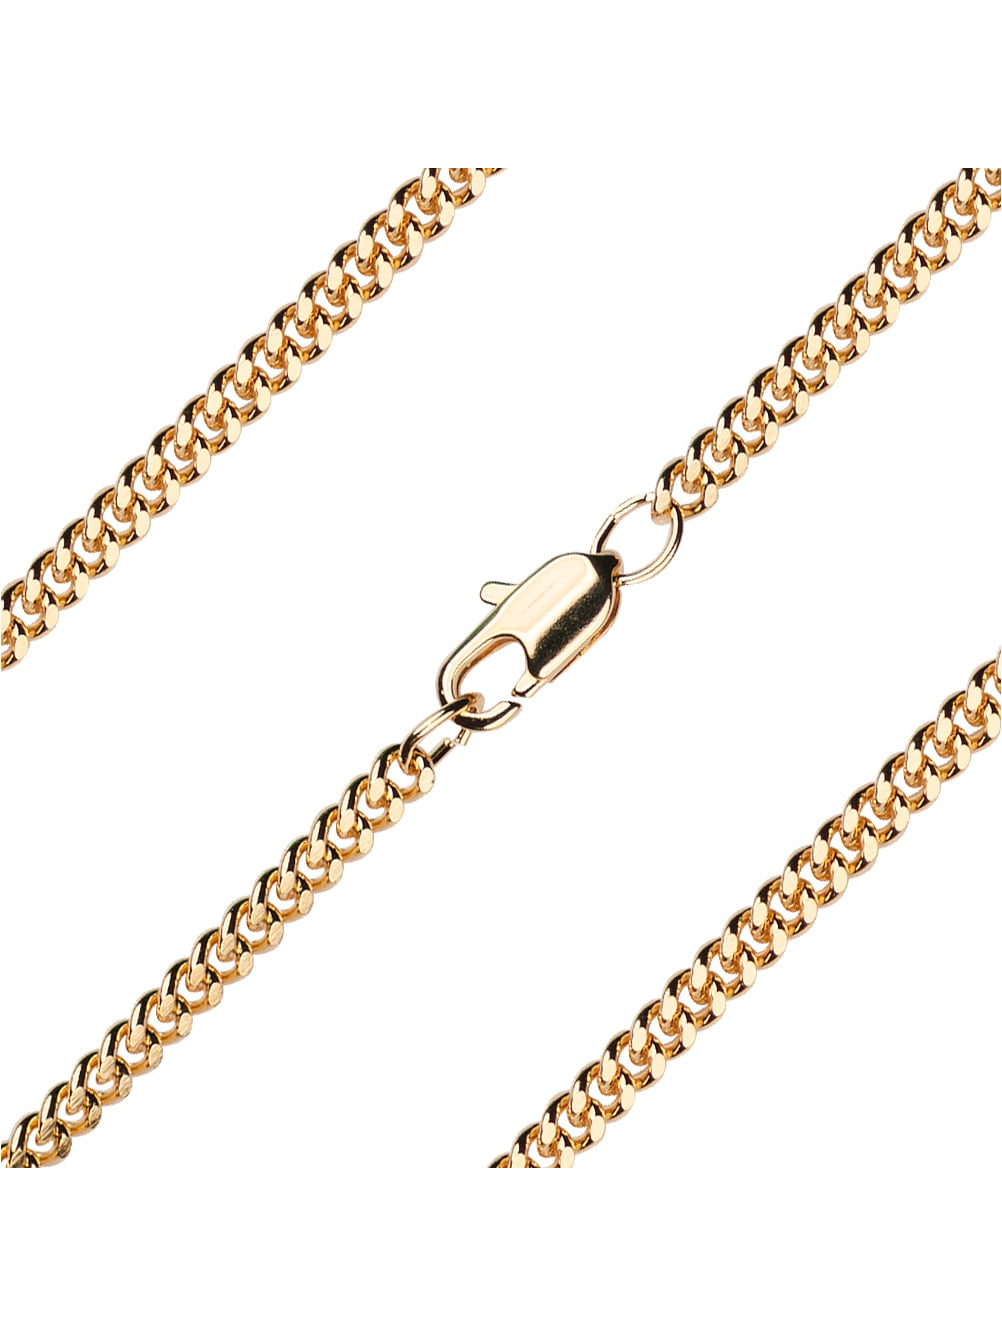 The Chain measures 2.90mm in thickness and comes carded. 24 inch Light Rhodium Heavy Curb Chain